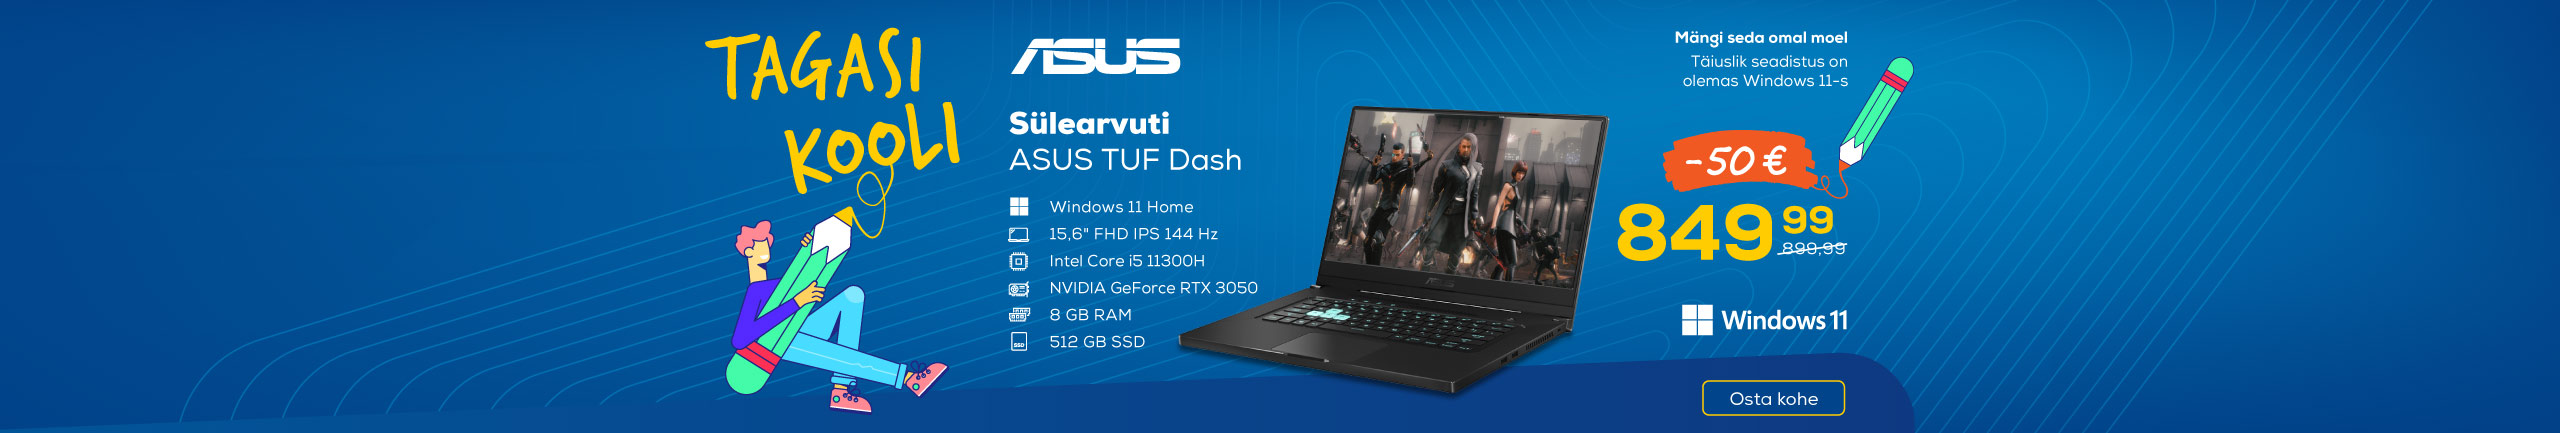 Back to school! Start Your new school year with a new ASUS laptop!